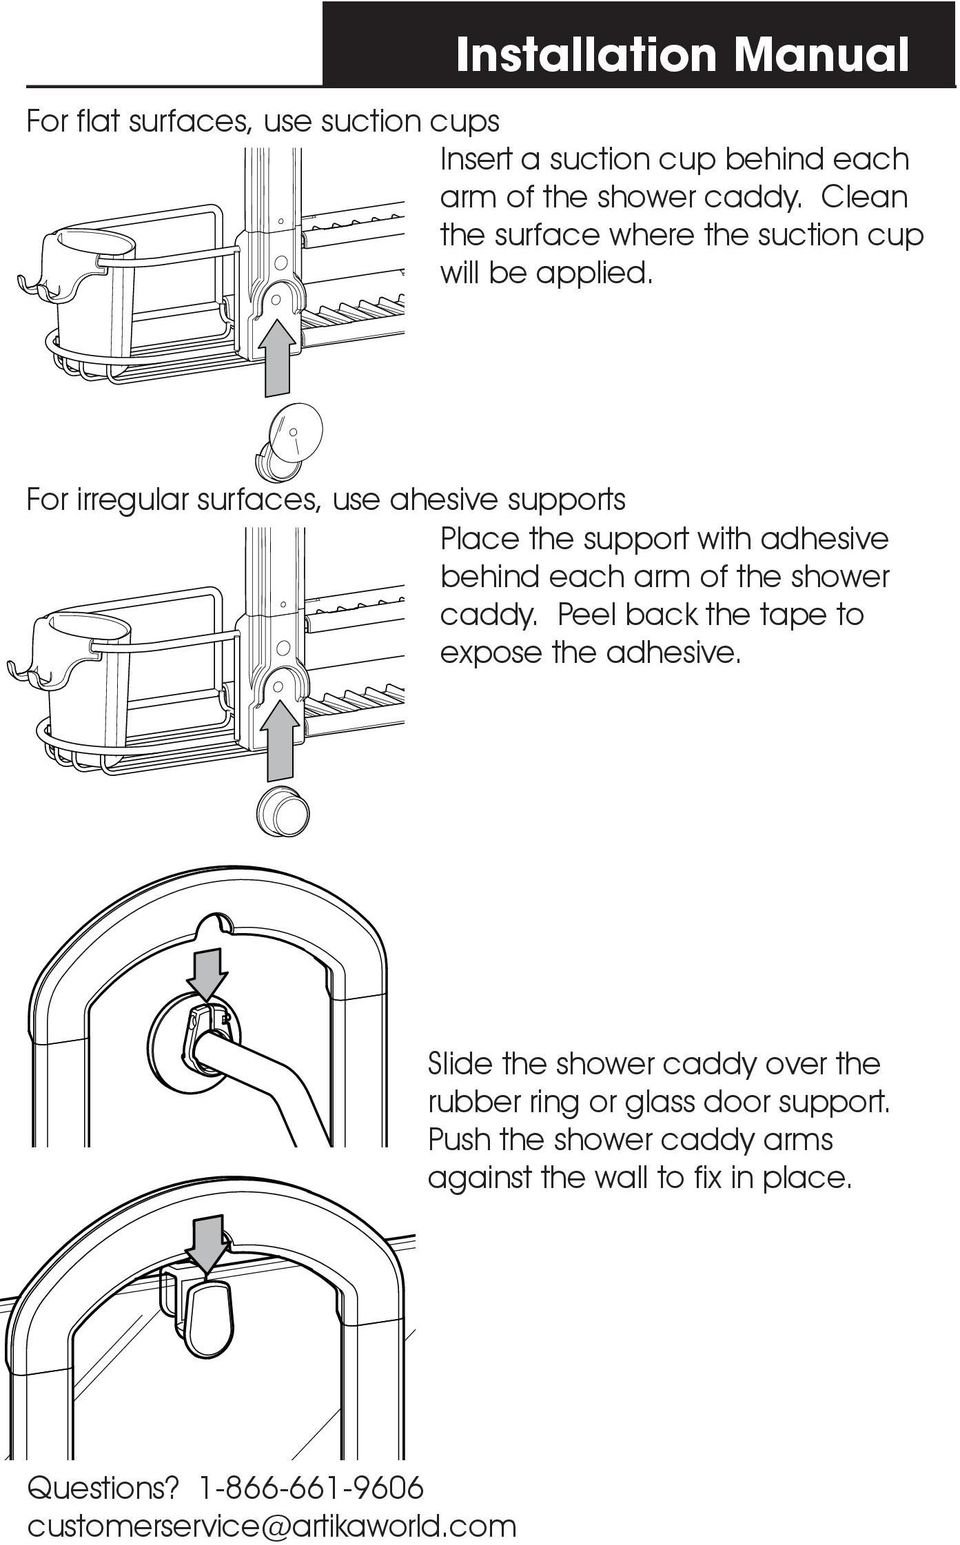 For irregular surfaces, use ahesive supports Place the support with adhesive behind each arm of the shower caddy.